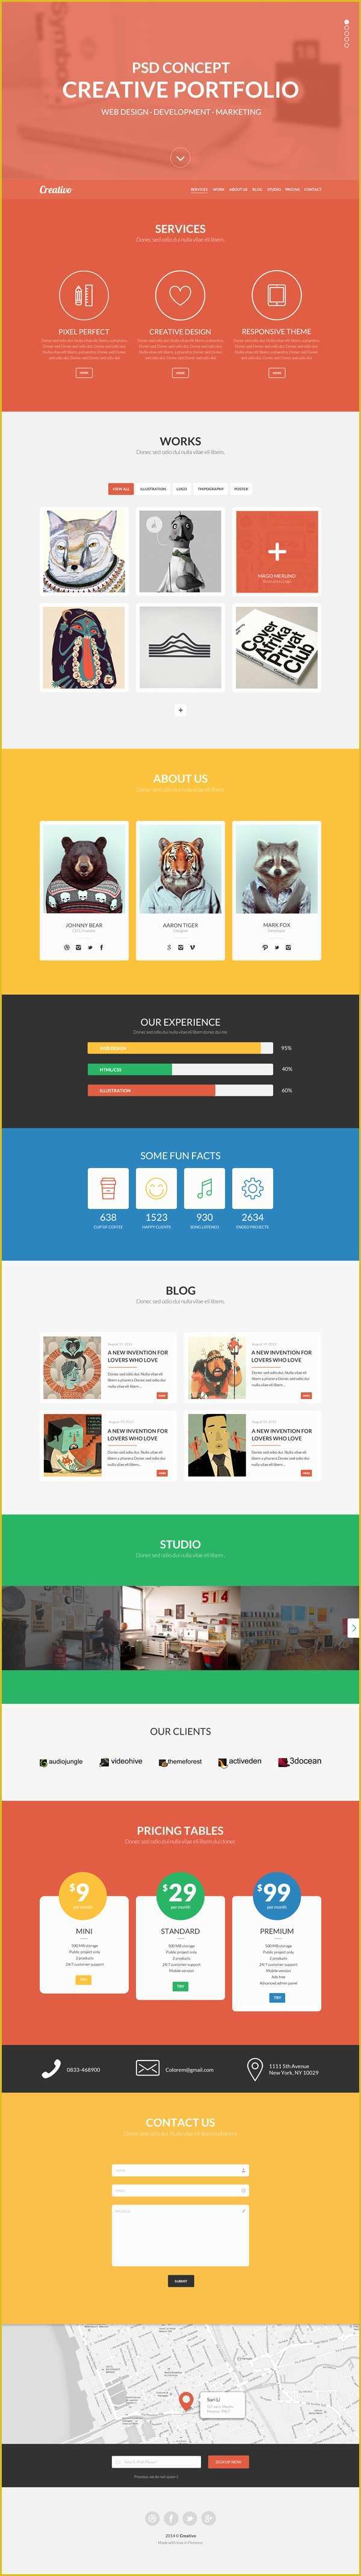 One Page Template Wordpress Free Of Psd Templates 20 E Page Free Web Templates